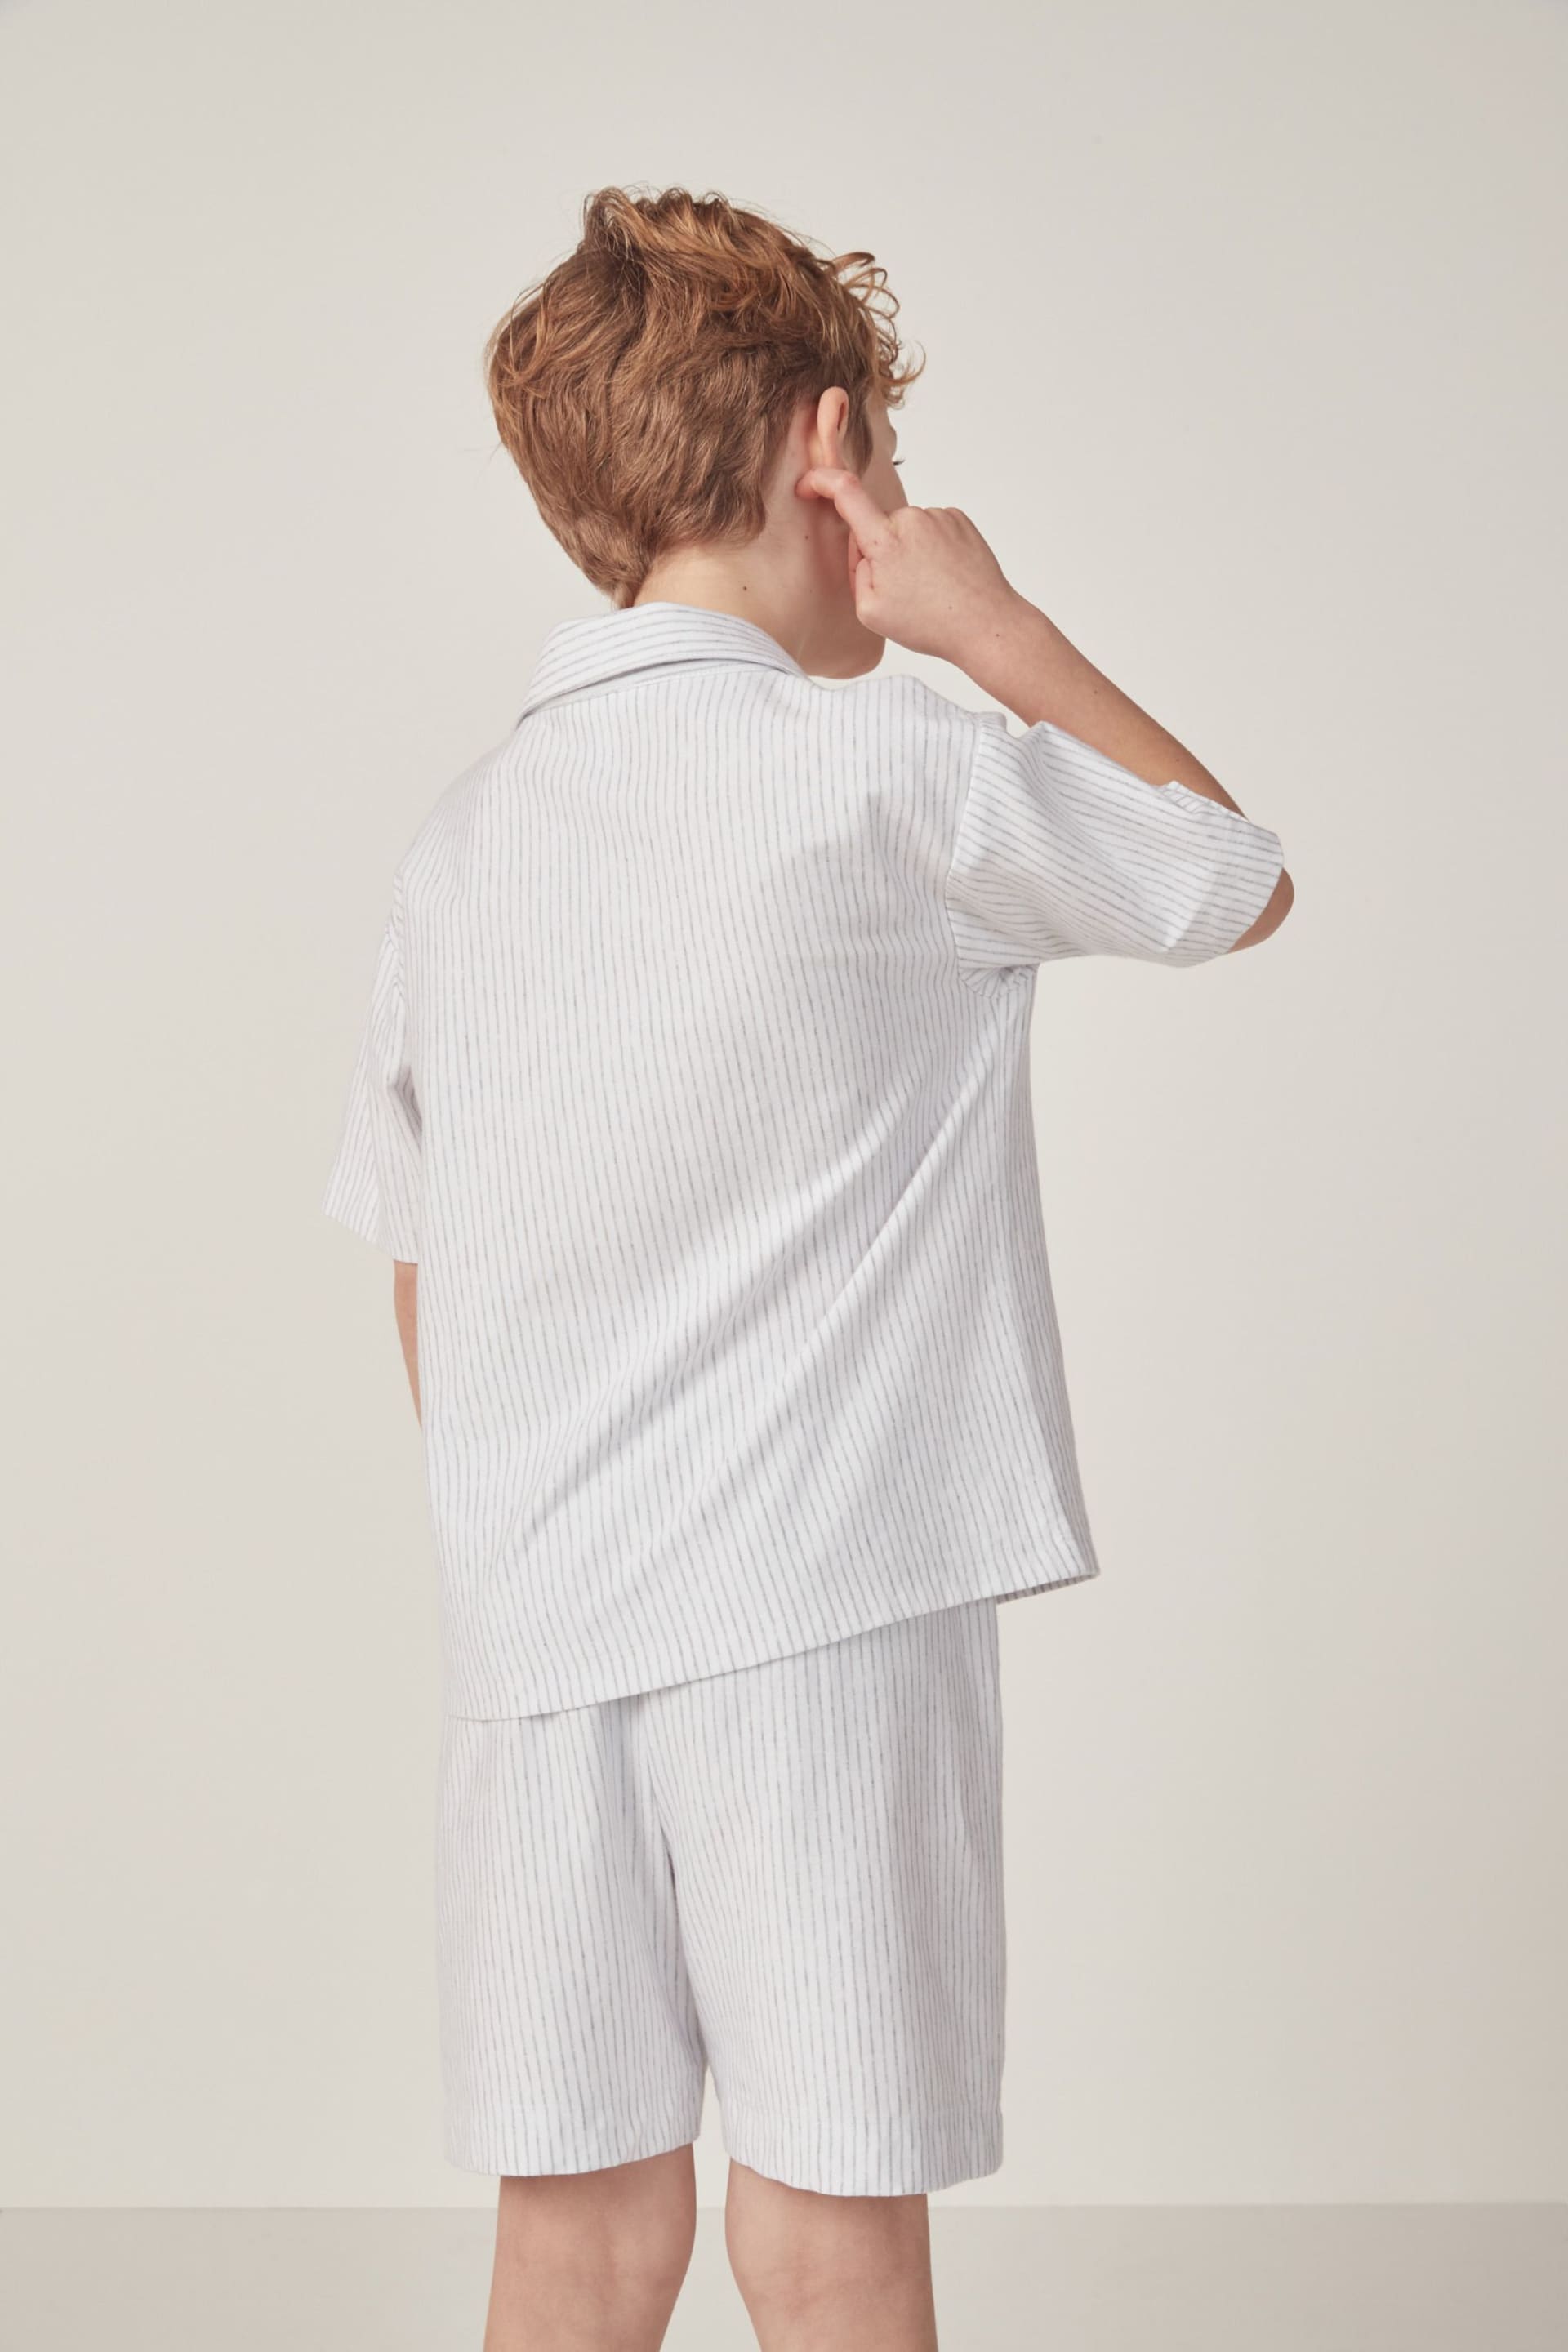 The White Company White Organic Cotton Classic Sailboat Embroidered Shortie Pyjama - Image 2 of 6